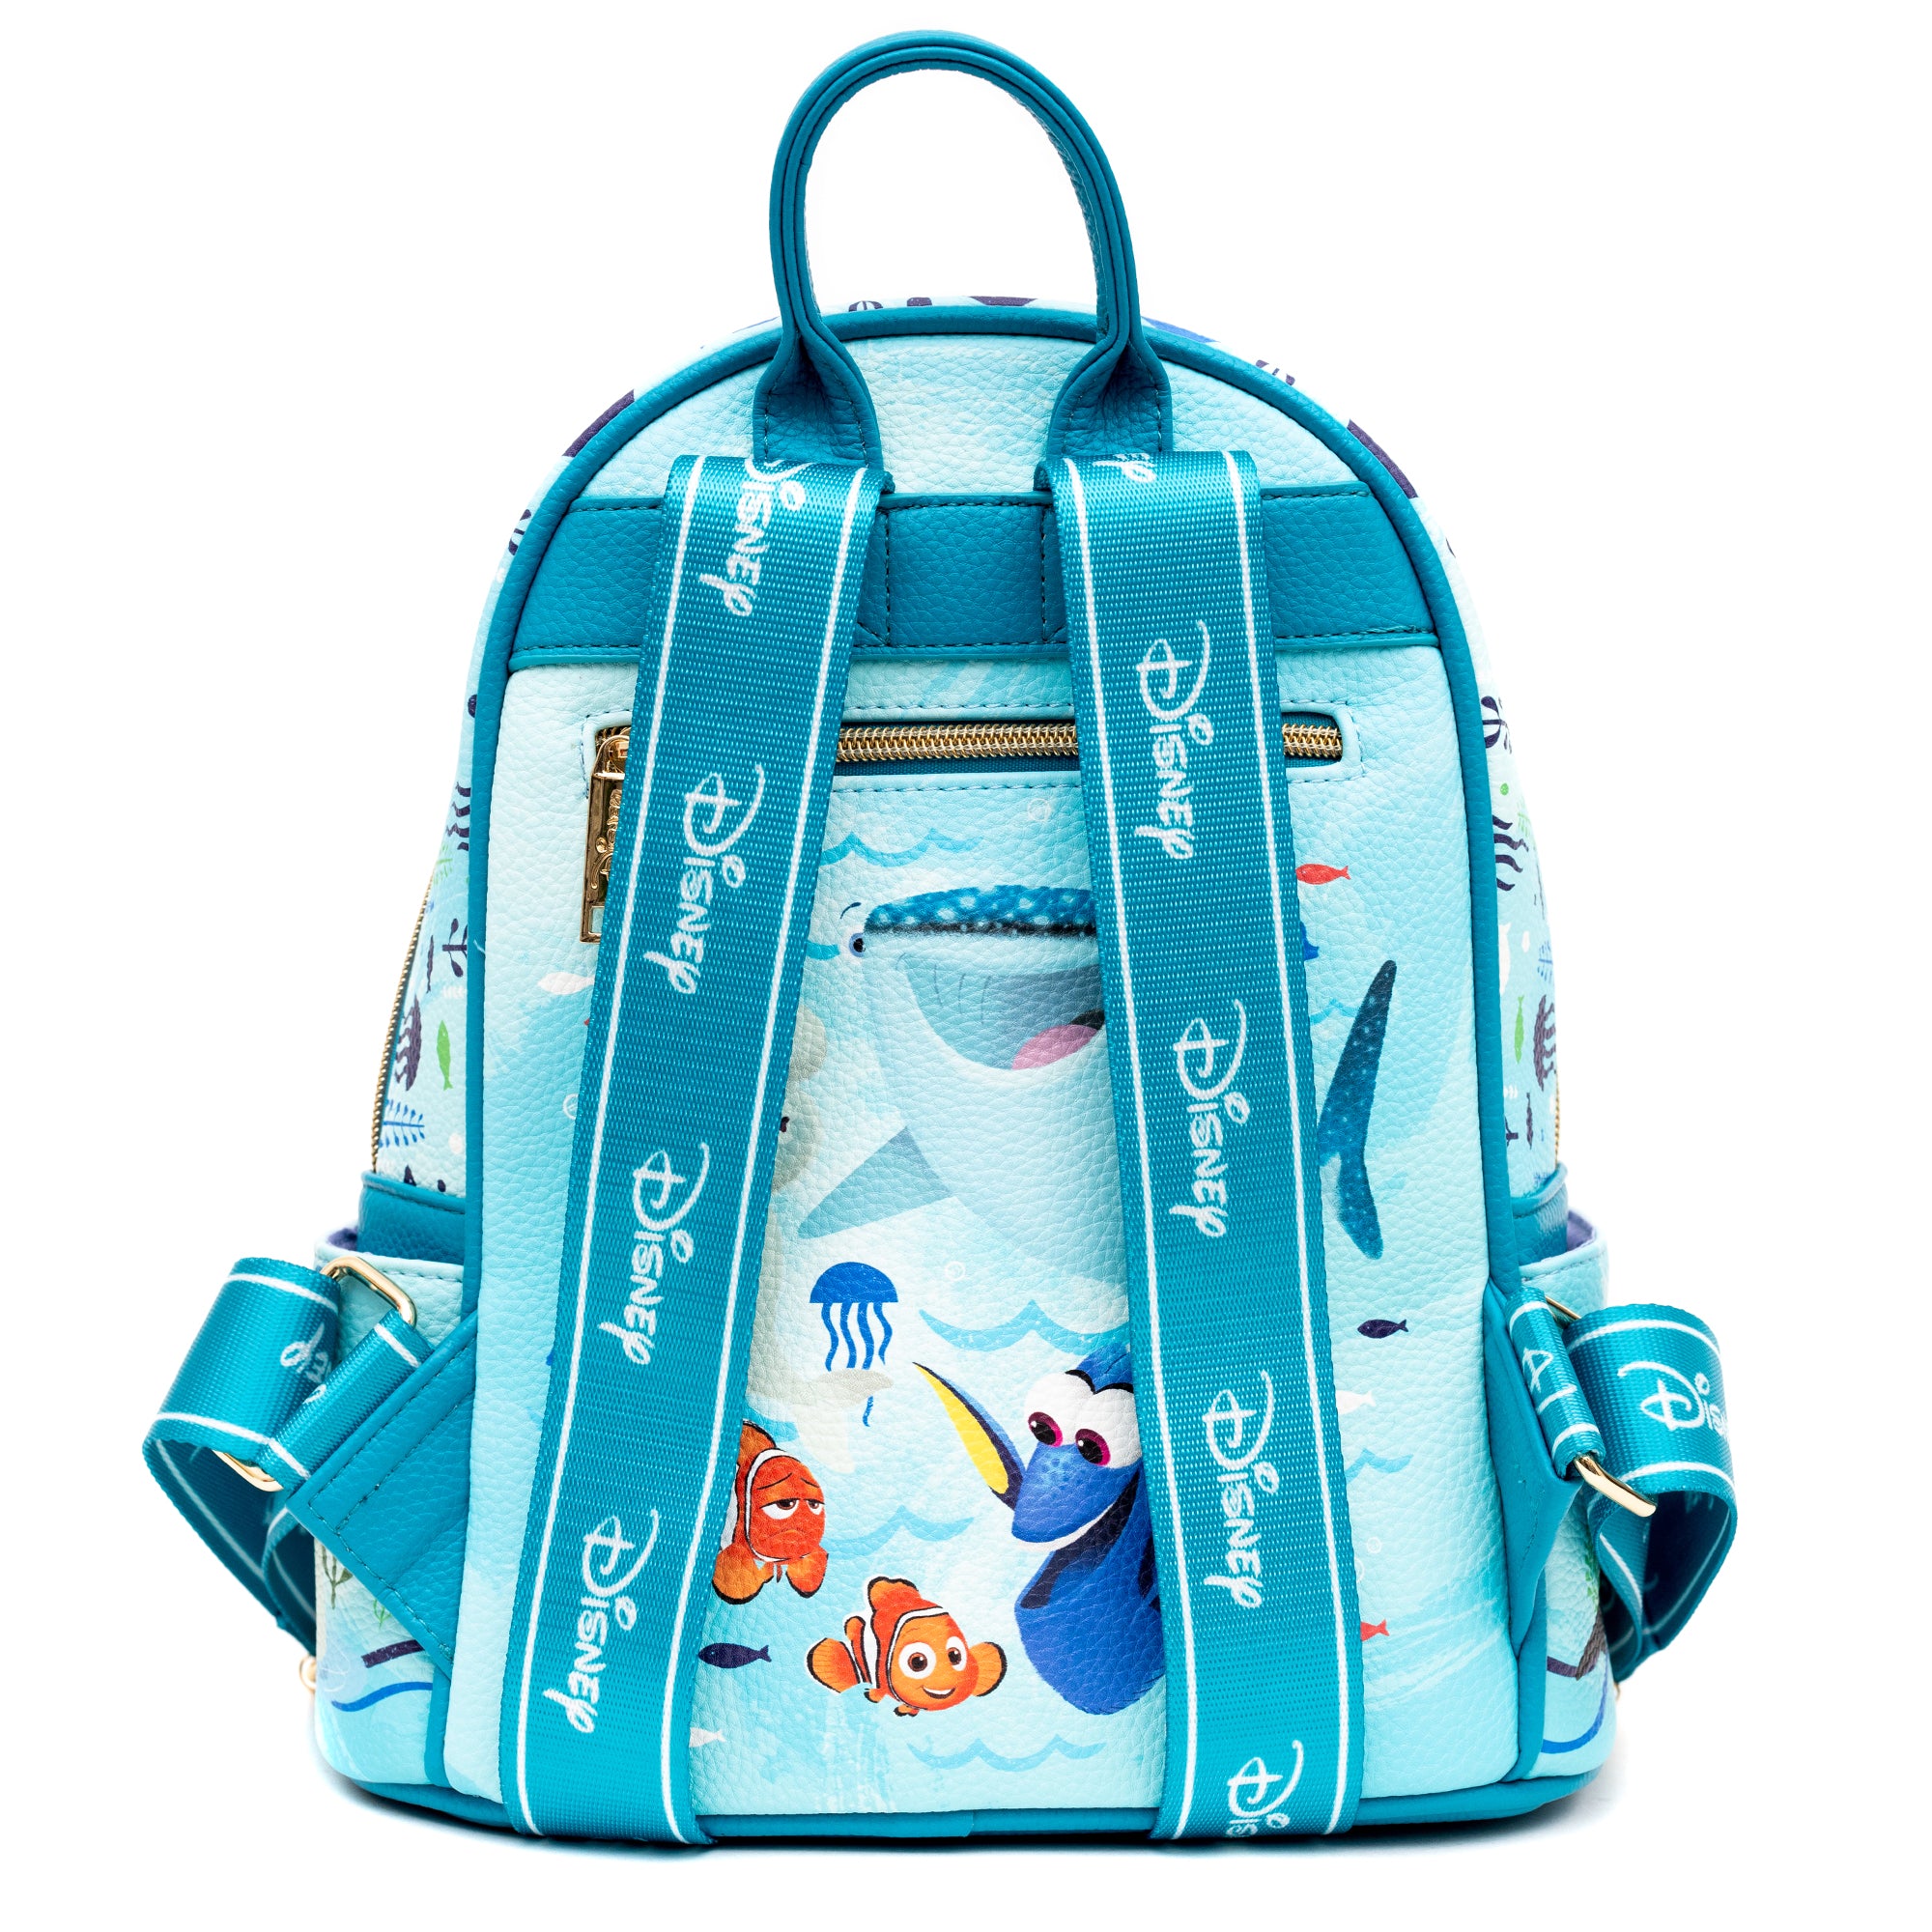 WondaPOP LUXE - Disney Pixar Finding Dory Mini Backpack - Limited Edition